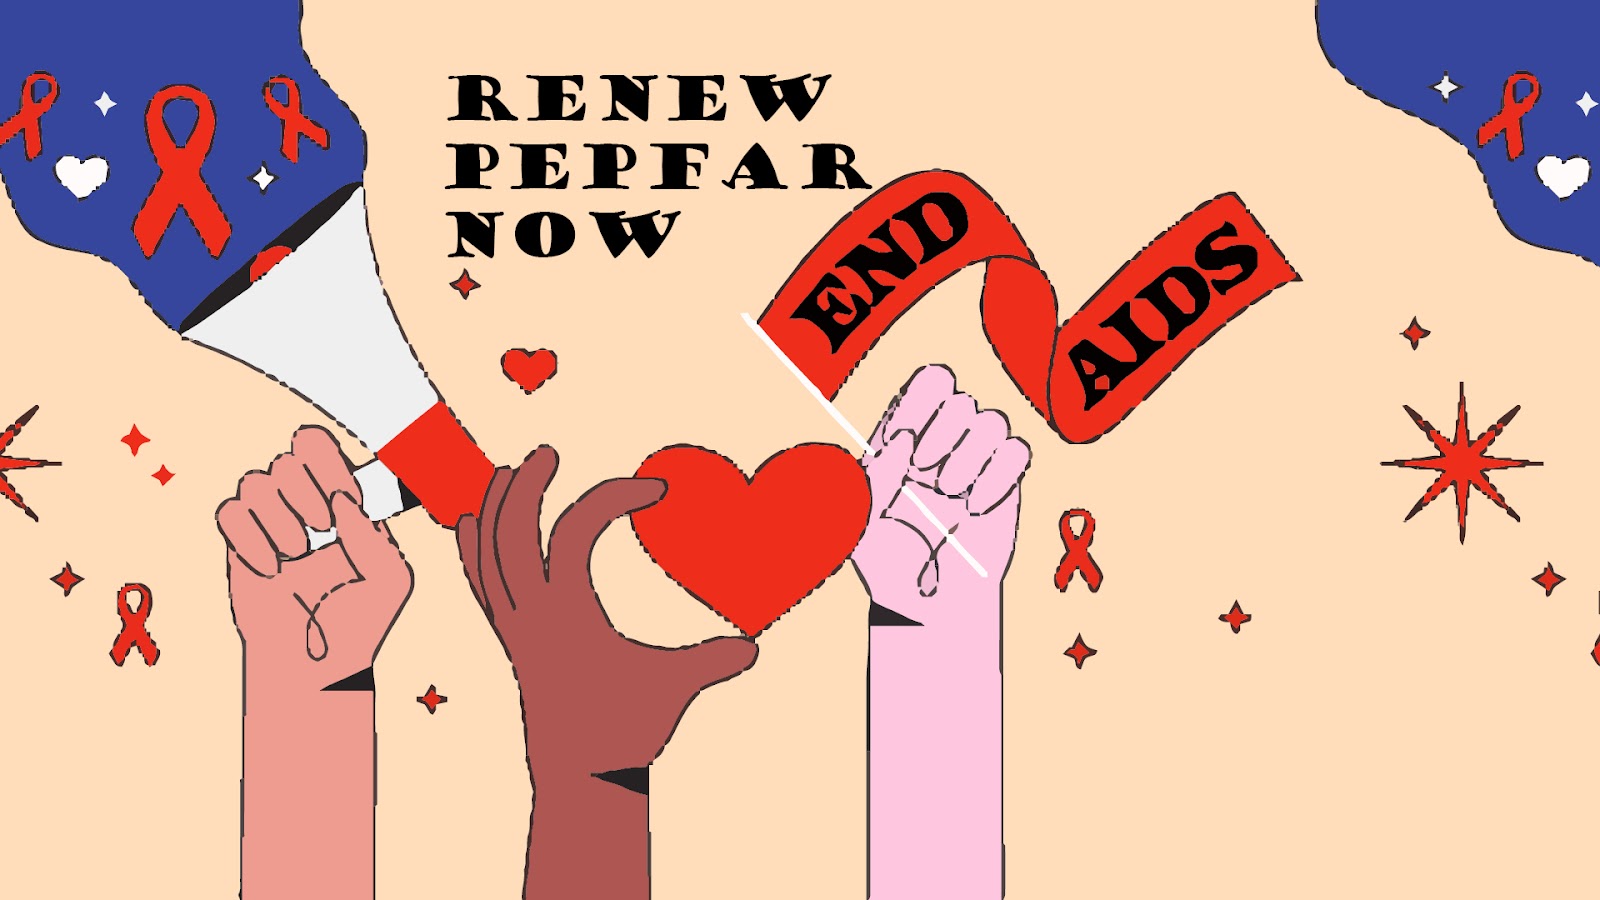 Banner with three hands holding a megaphone and red ribbons in the air. Text reads "Renew PEPFAR now, end AIDS"